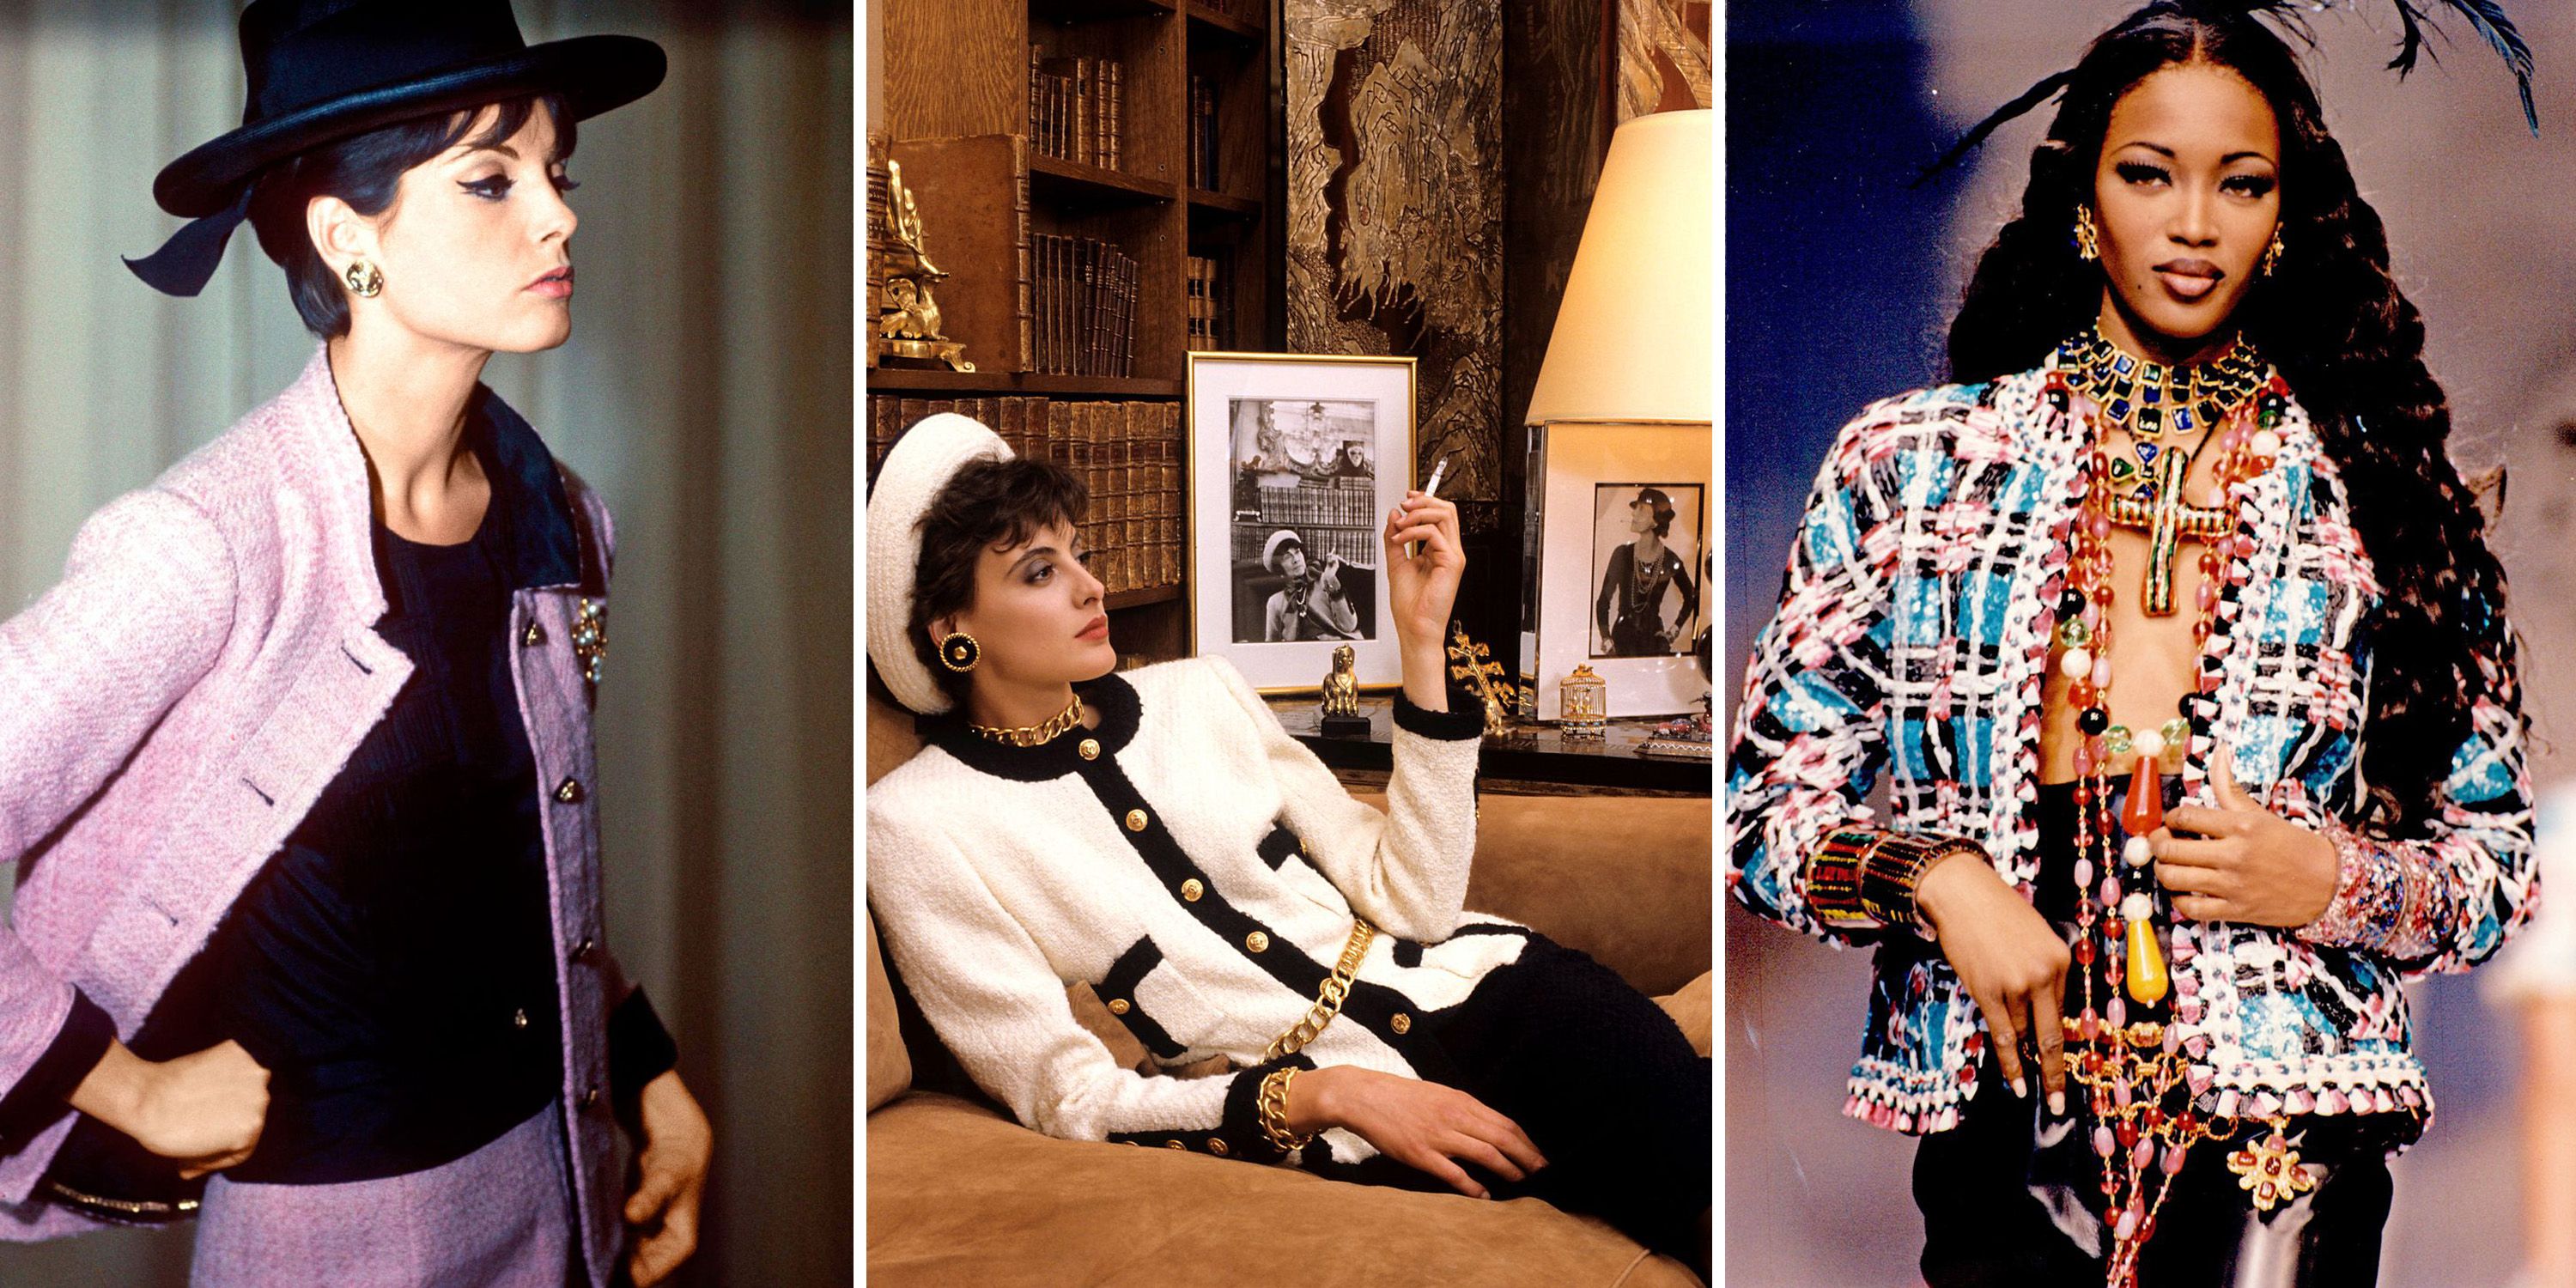 The evolution of Chanel's style